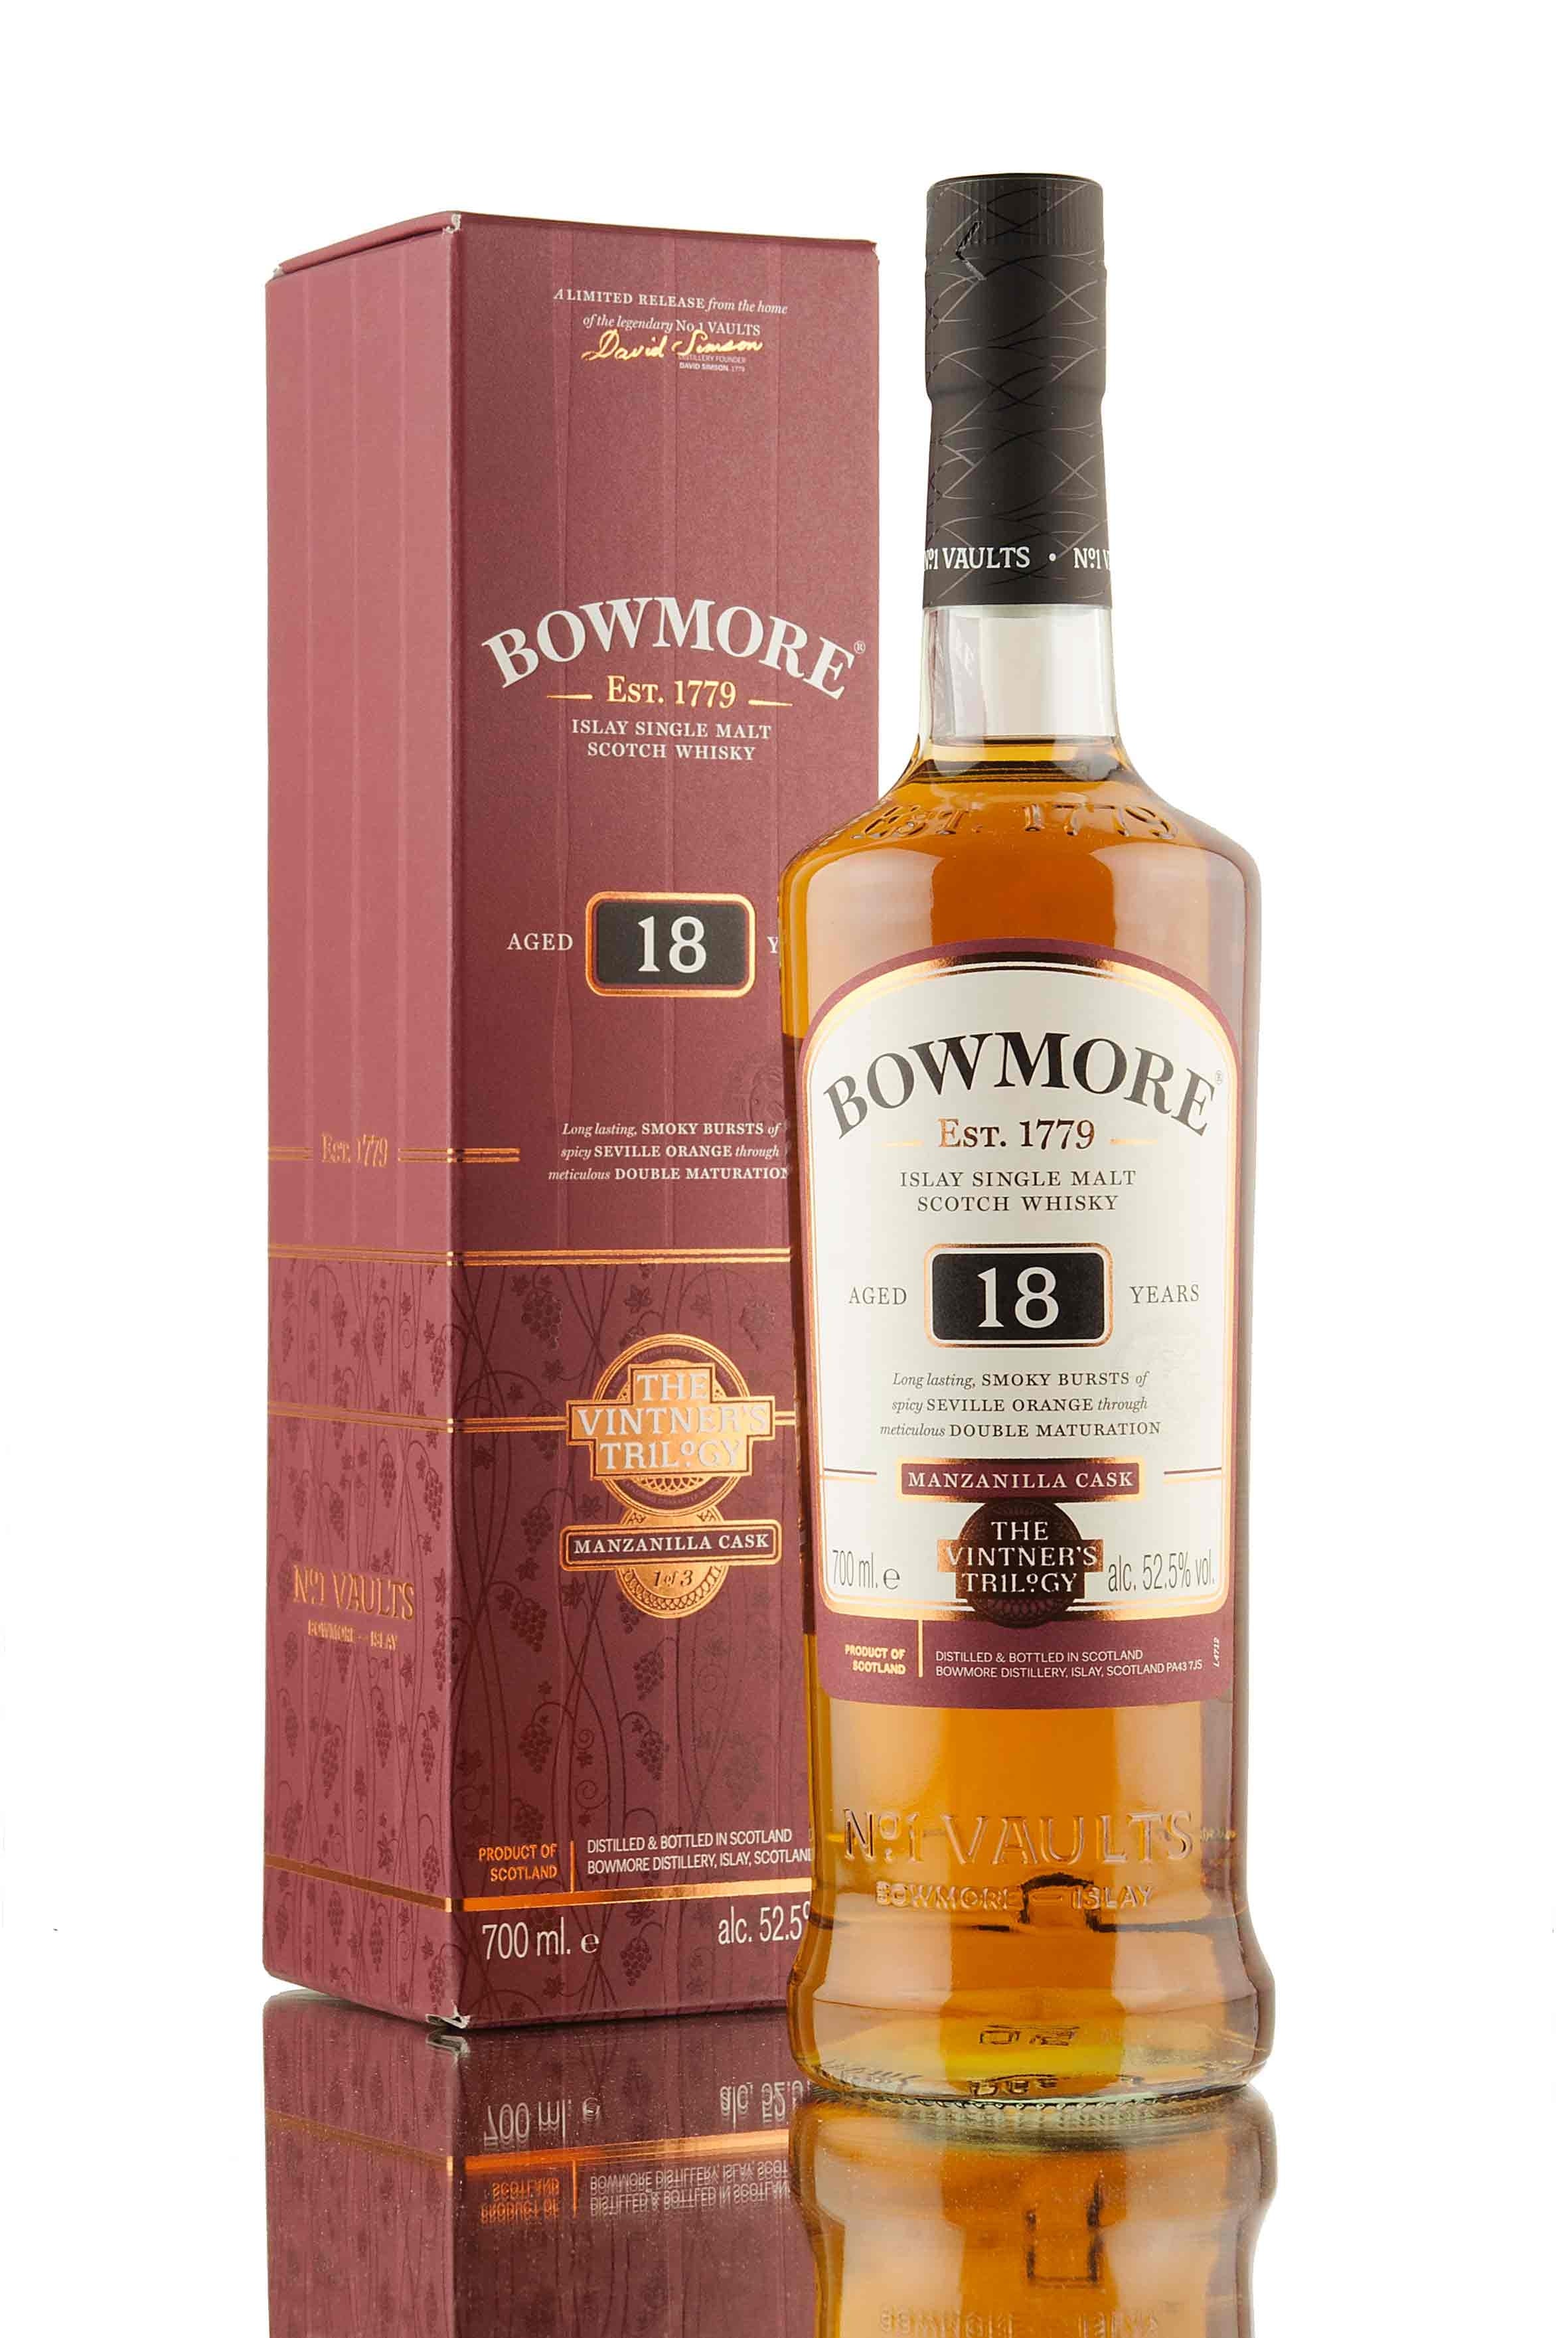 Bowmore 18 Year Old | The Vinter's Trilogy